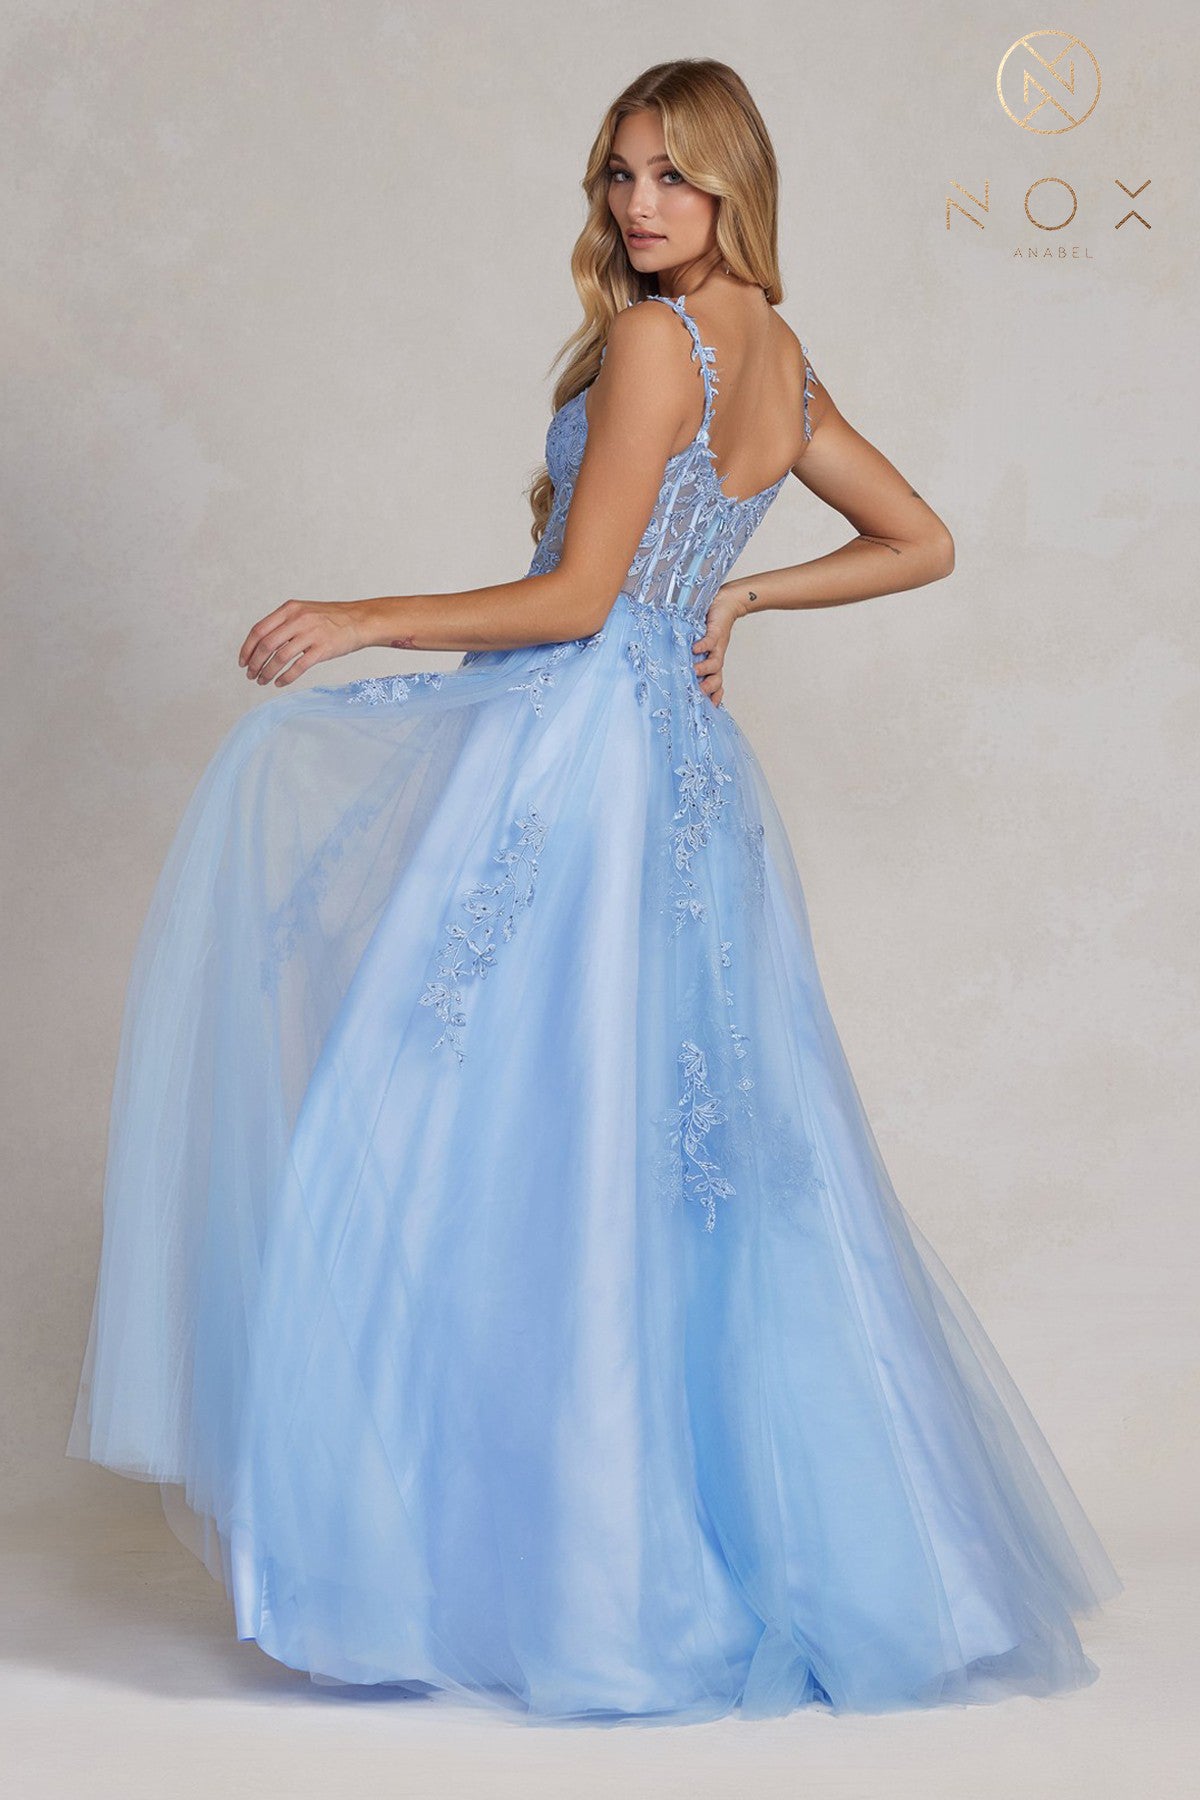 Nox Anabel -T1082 Sweetheart Neck Corset Prom Gown